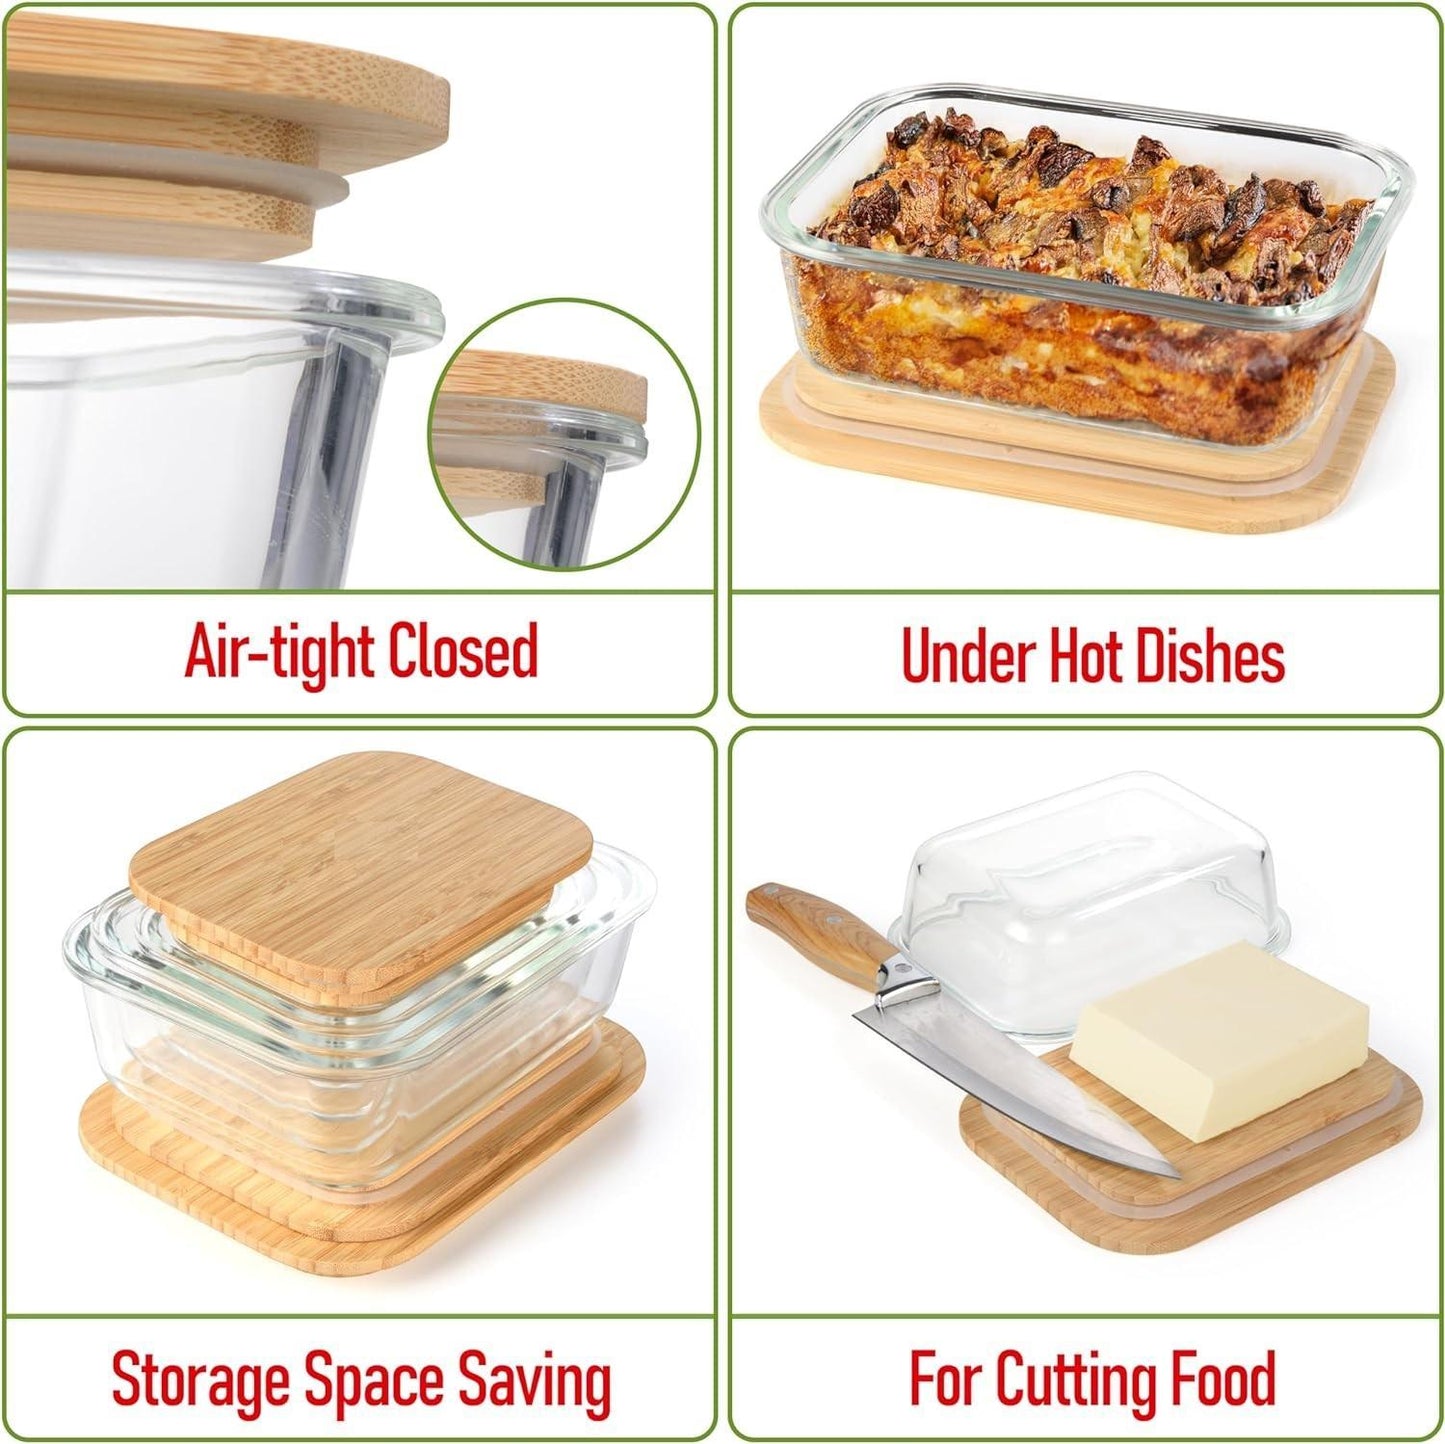 Fresh Guard 4 Pack Glass Food Storage Containers with Bamboo Lids, Glass Meal Prep Containers,Airtight Glass Bento Boxes with Bamboo Lids, Safe for Microwave, Oven, Freezer and Dishwasher, BPA Free